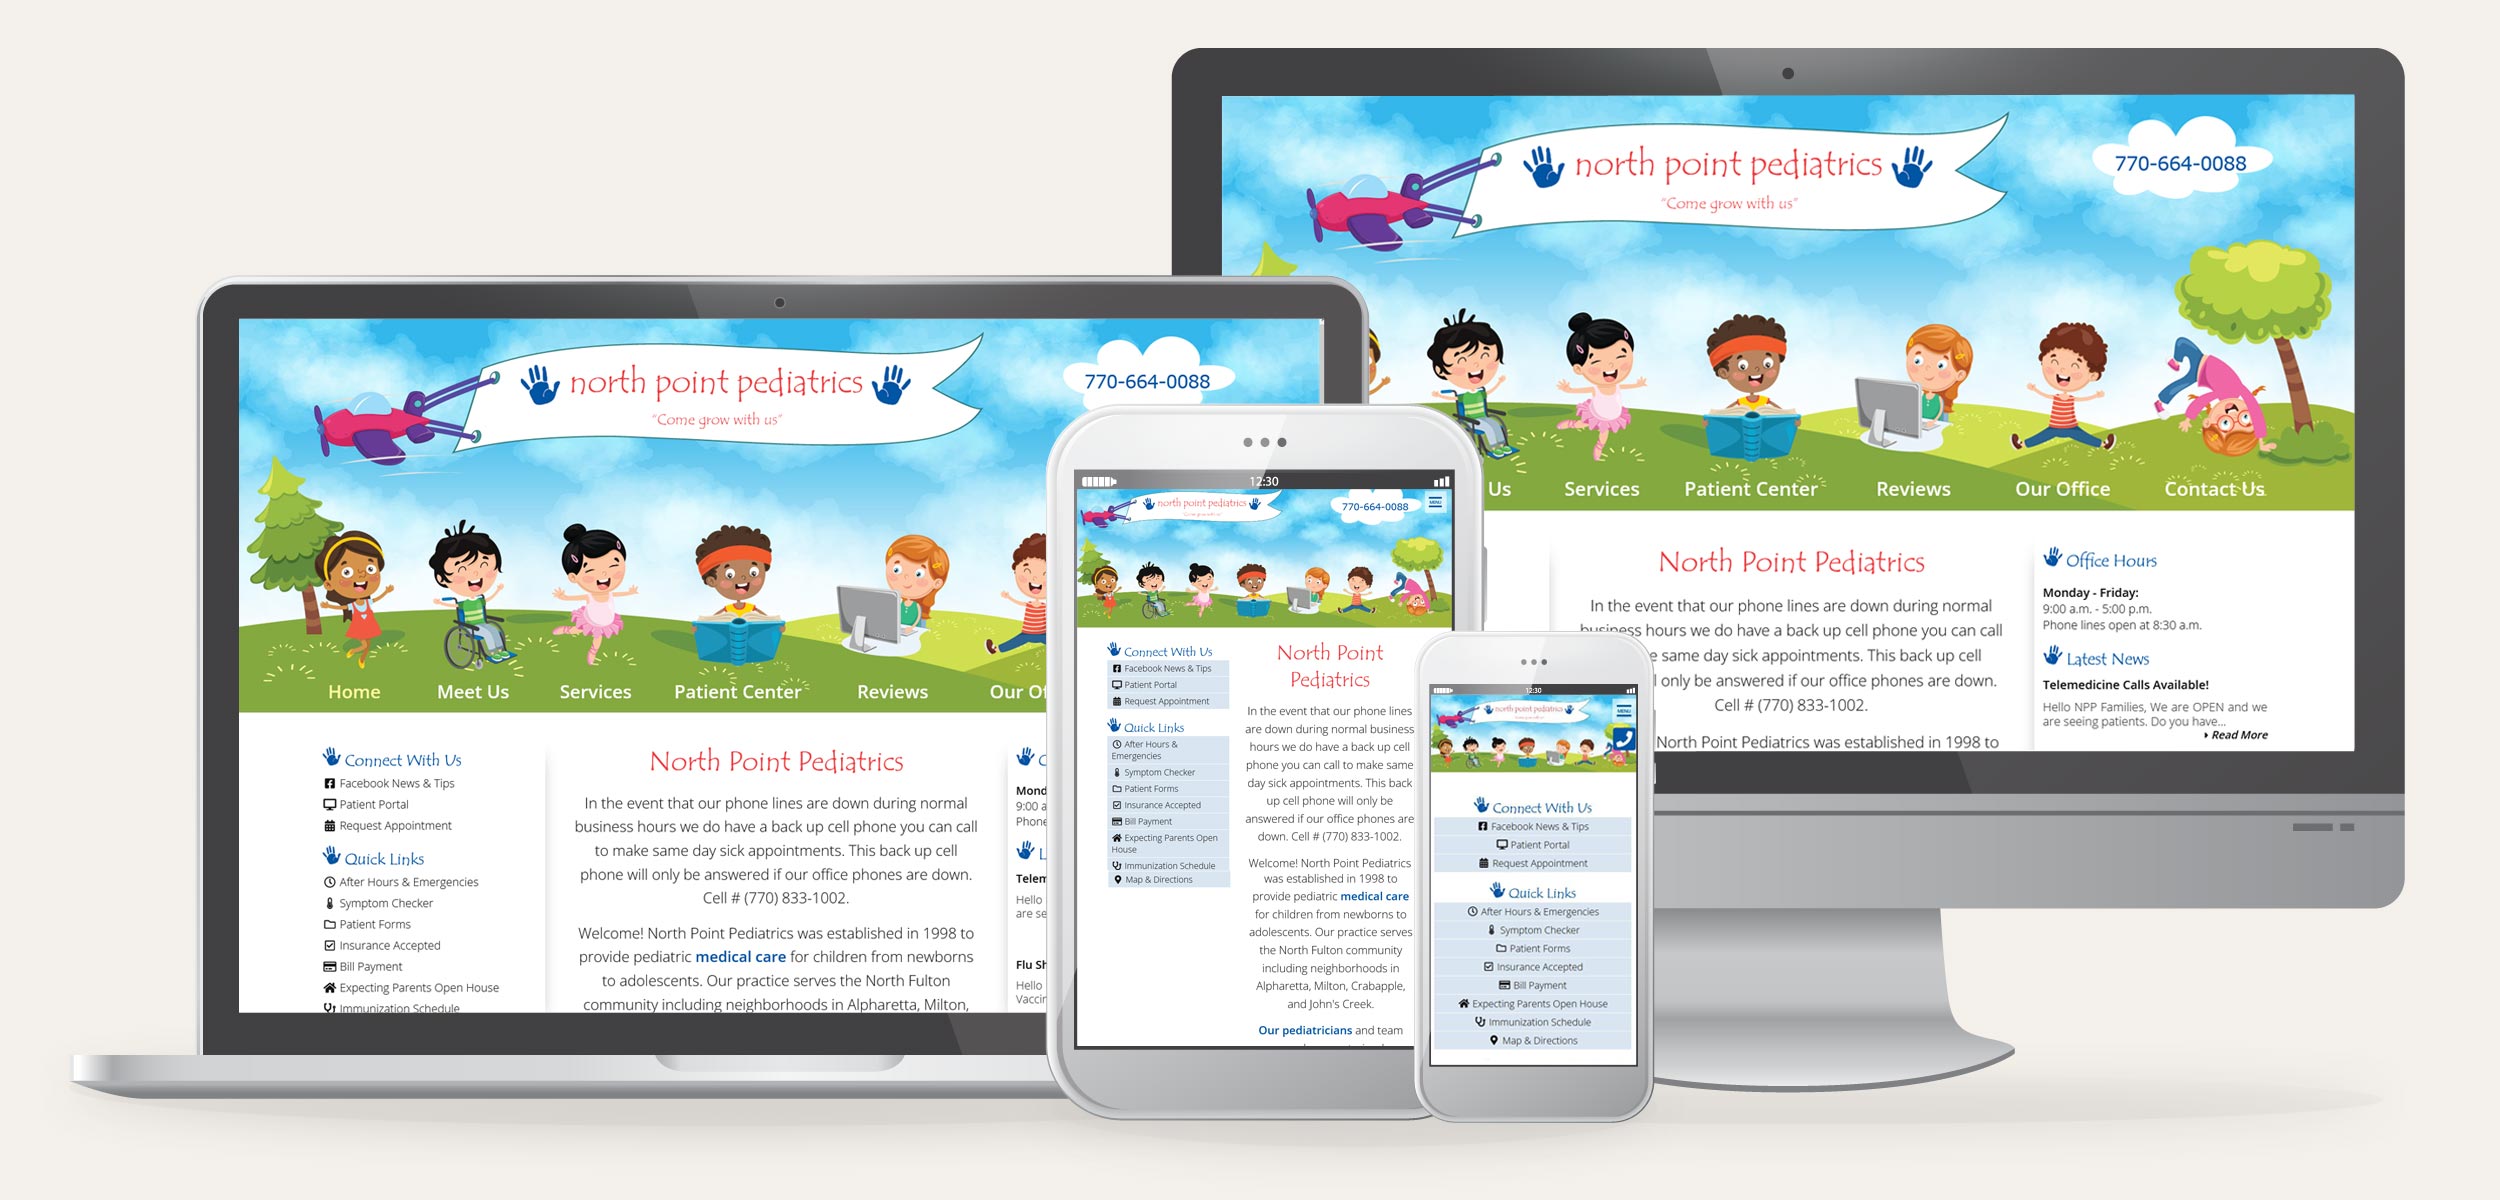 MMA developed the website for North Point Pediatrics